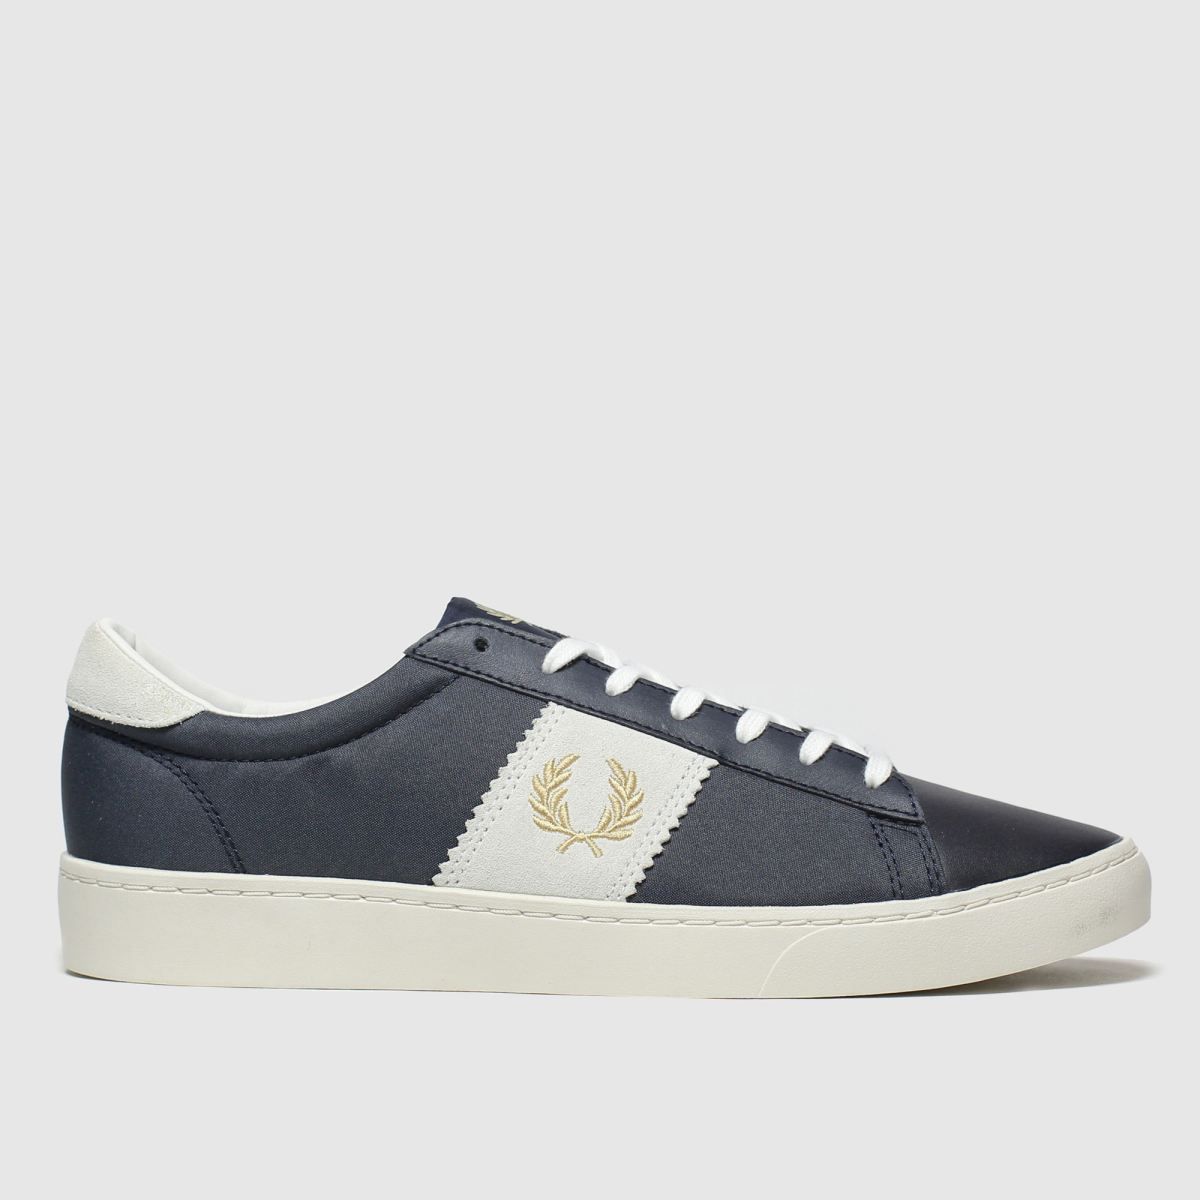 Fred Perry Navy \u0026 Gold Spencer Trainers 